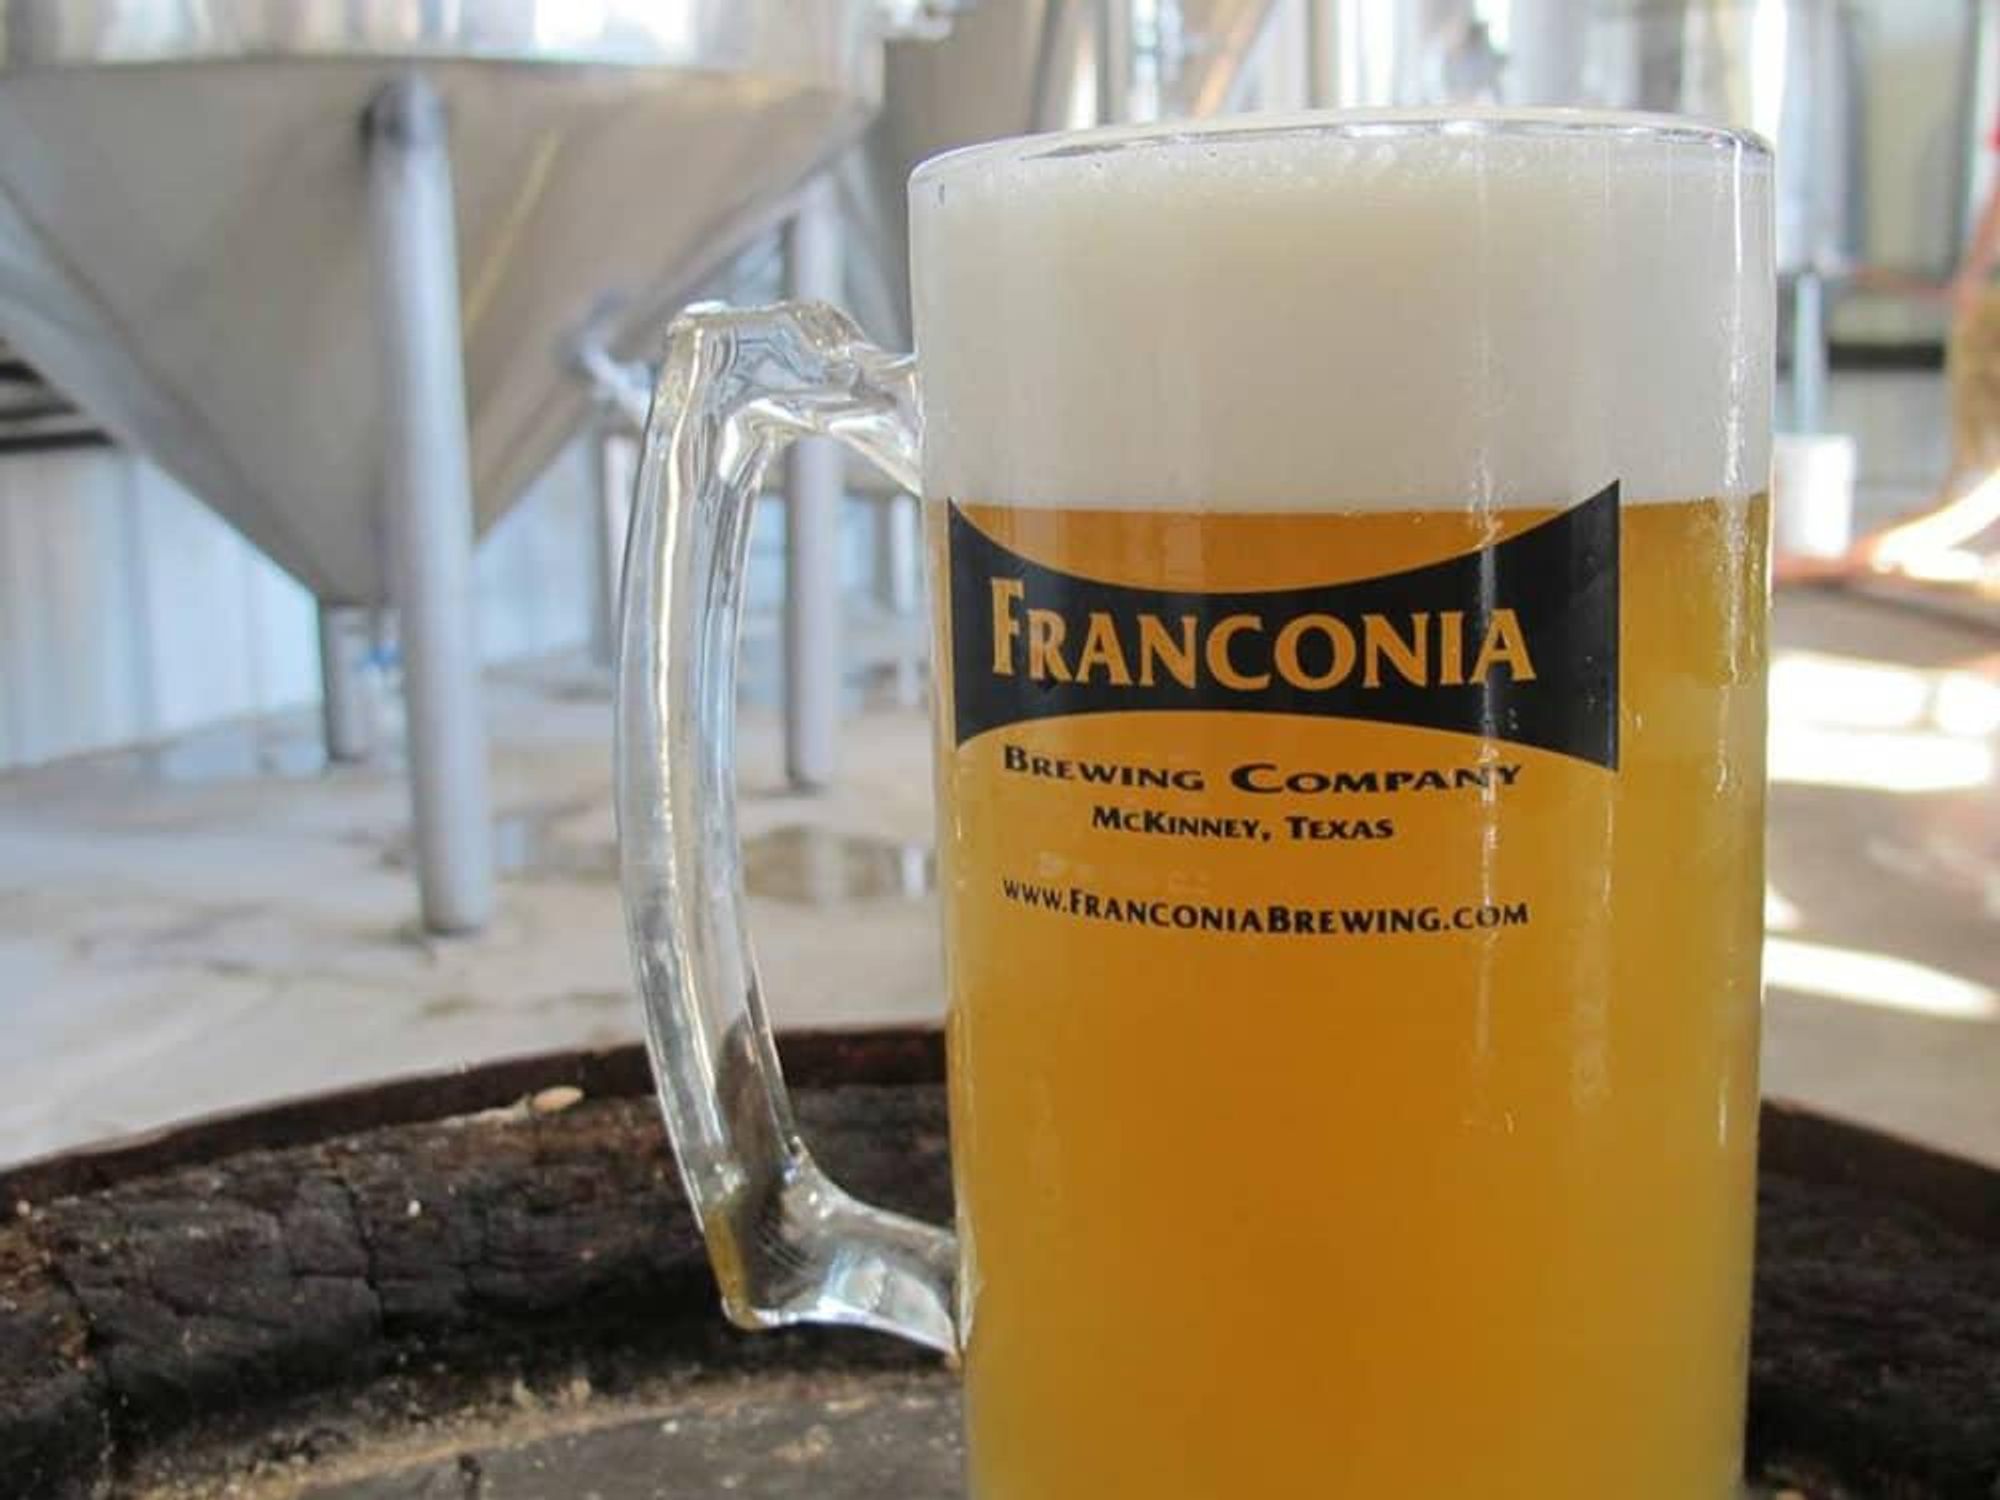 Franconia Brewing Co. wheat beer